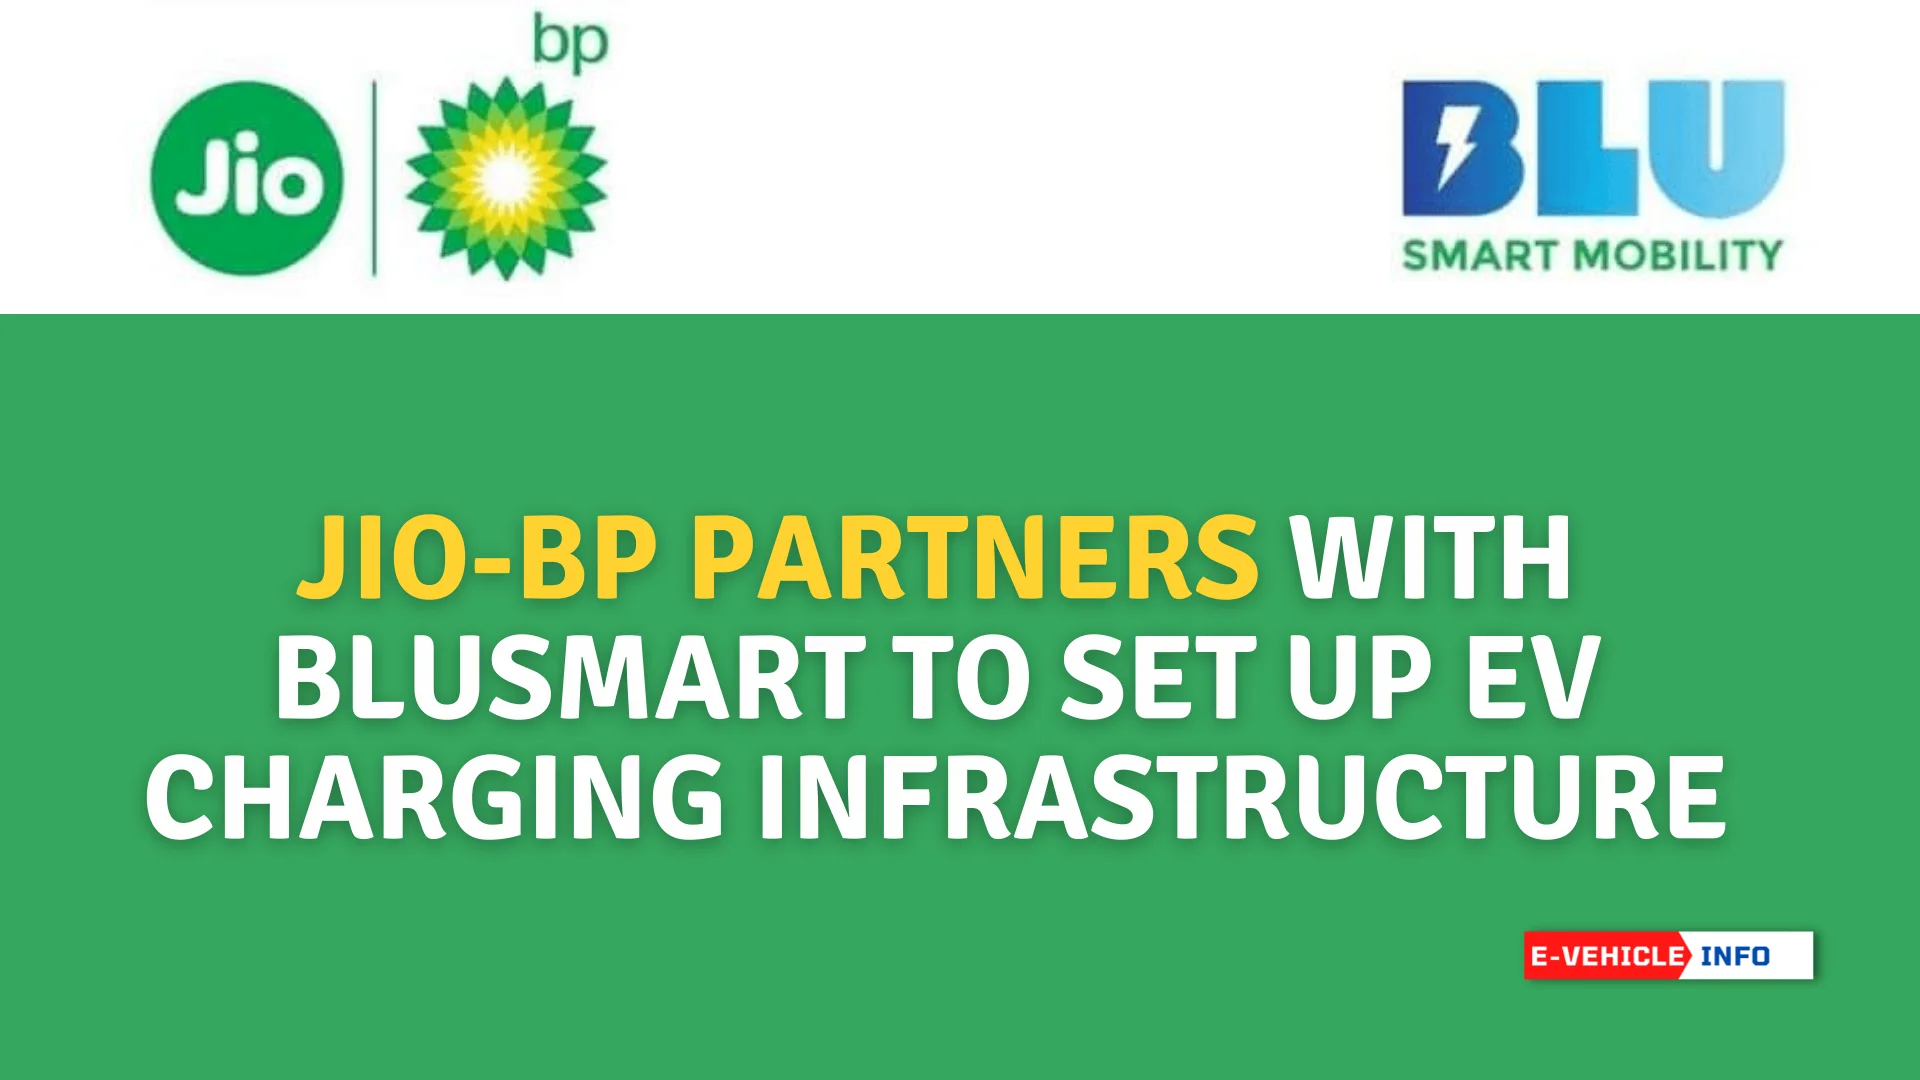 https://e-vehicleinfo.com/jio-bp-partners-with-blusmart-to-set-up-ev-charging-infrastructure/